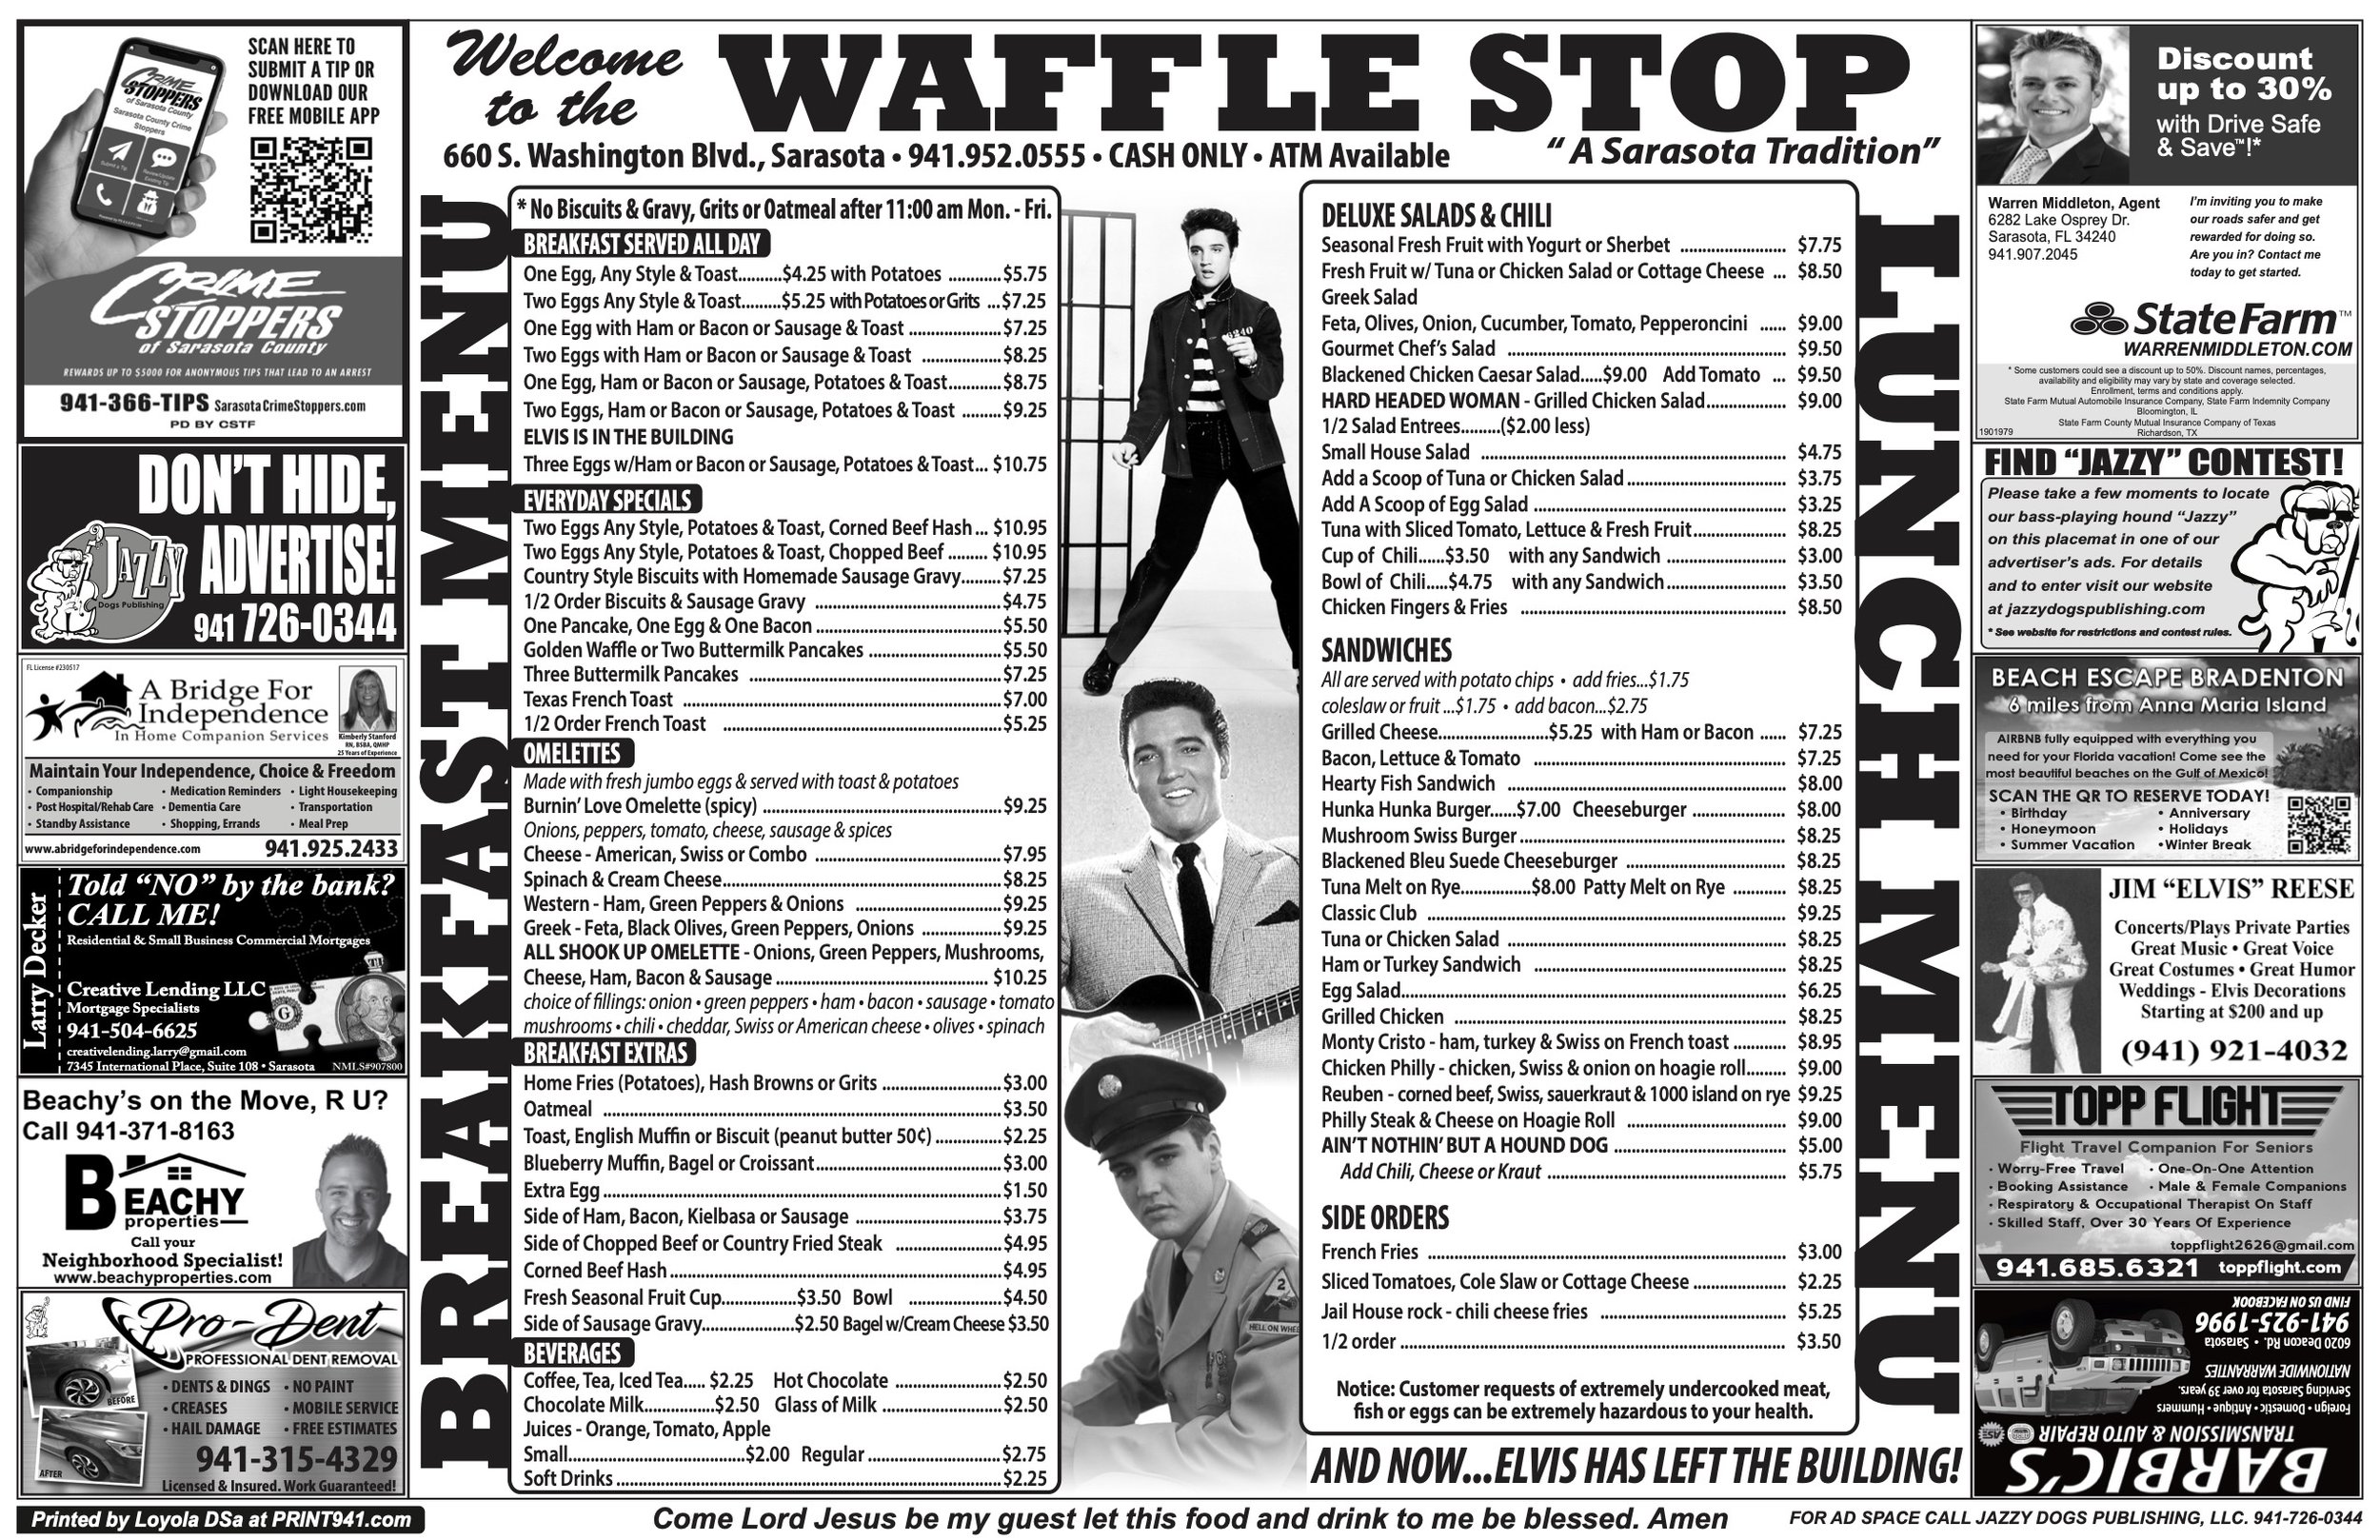 2023-03 Waffle Stop Placemat PROOF 3.jpg